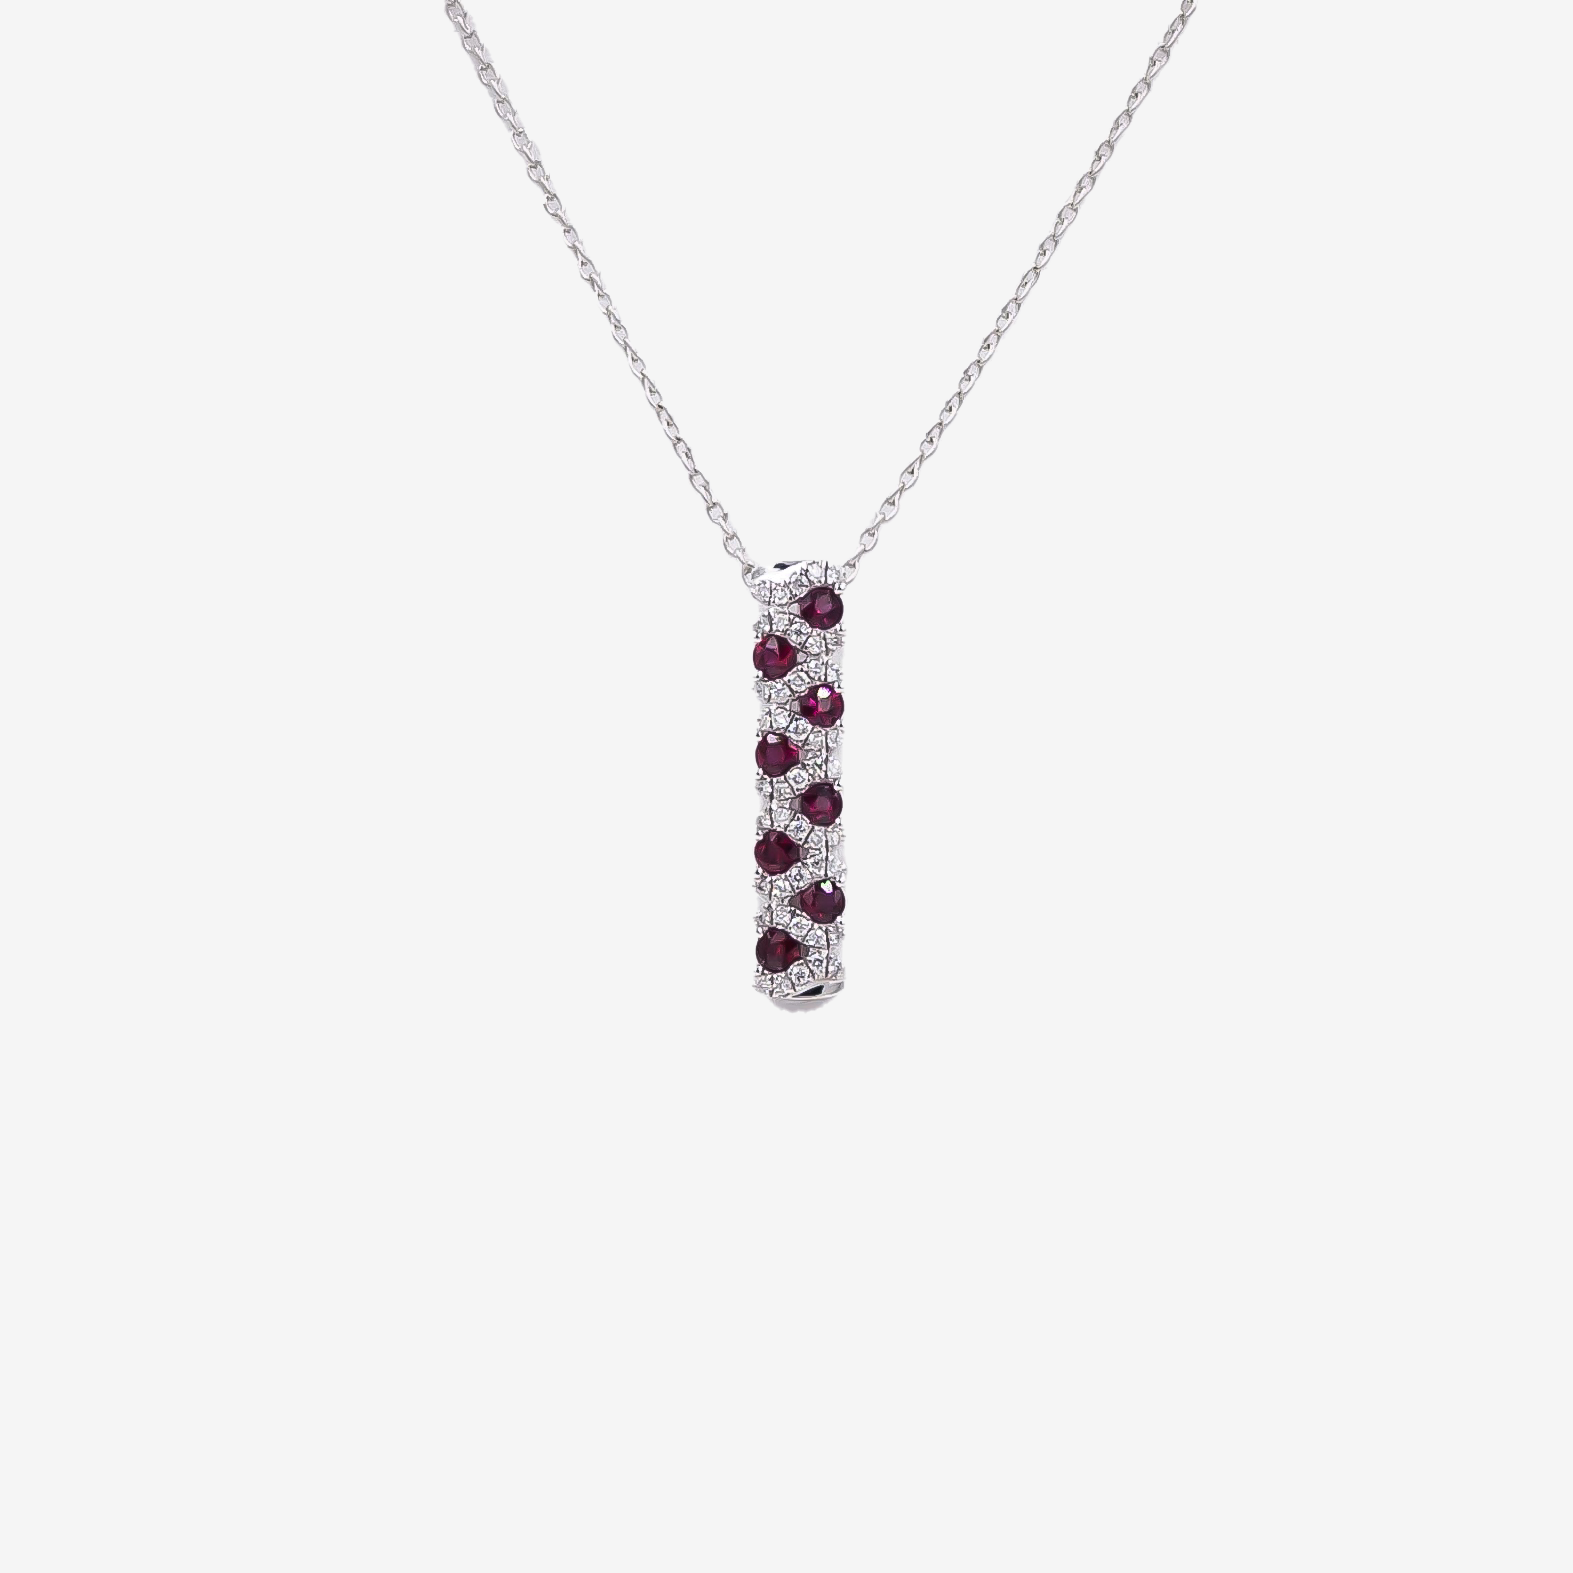 Stripe necklace with rubies and diamonds